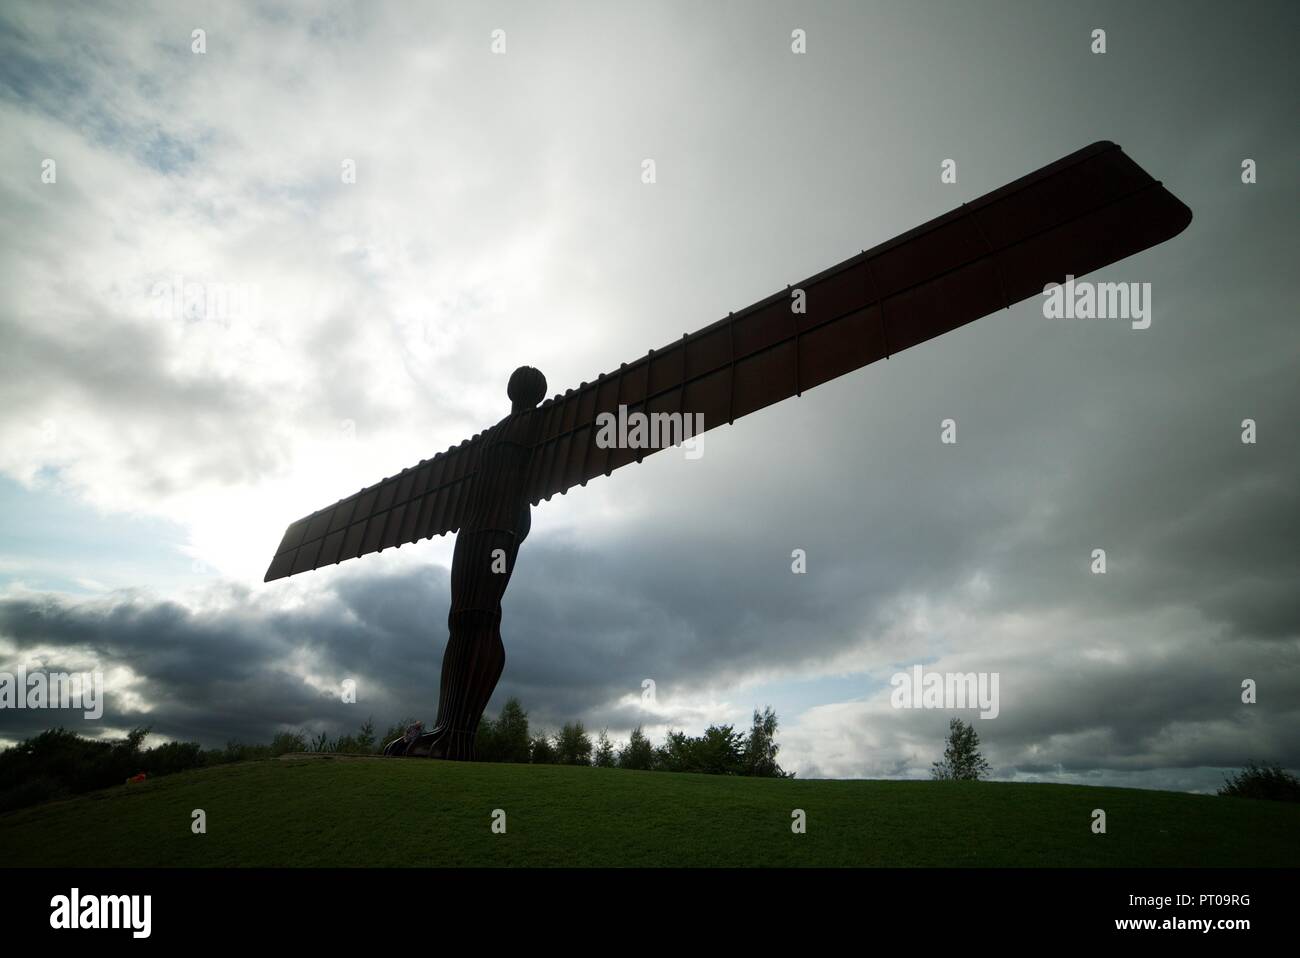 The view looking up at the Angel of the North statue/sculpture in Tyneside, near Newcastle. The famous landmark in England. Stock Photo